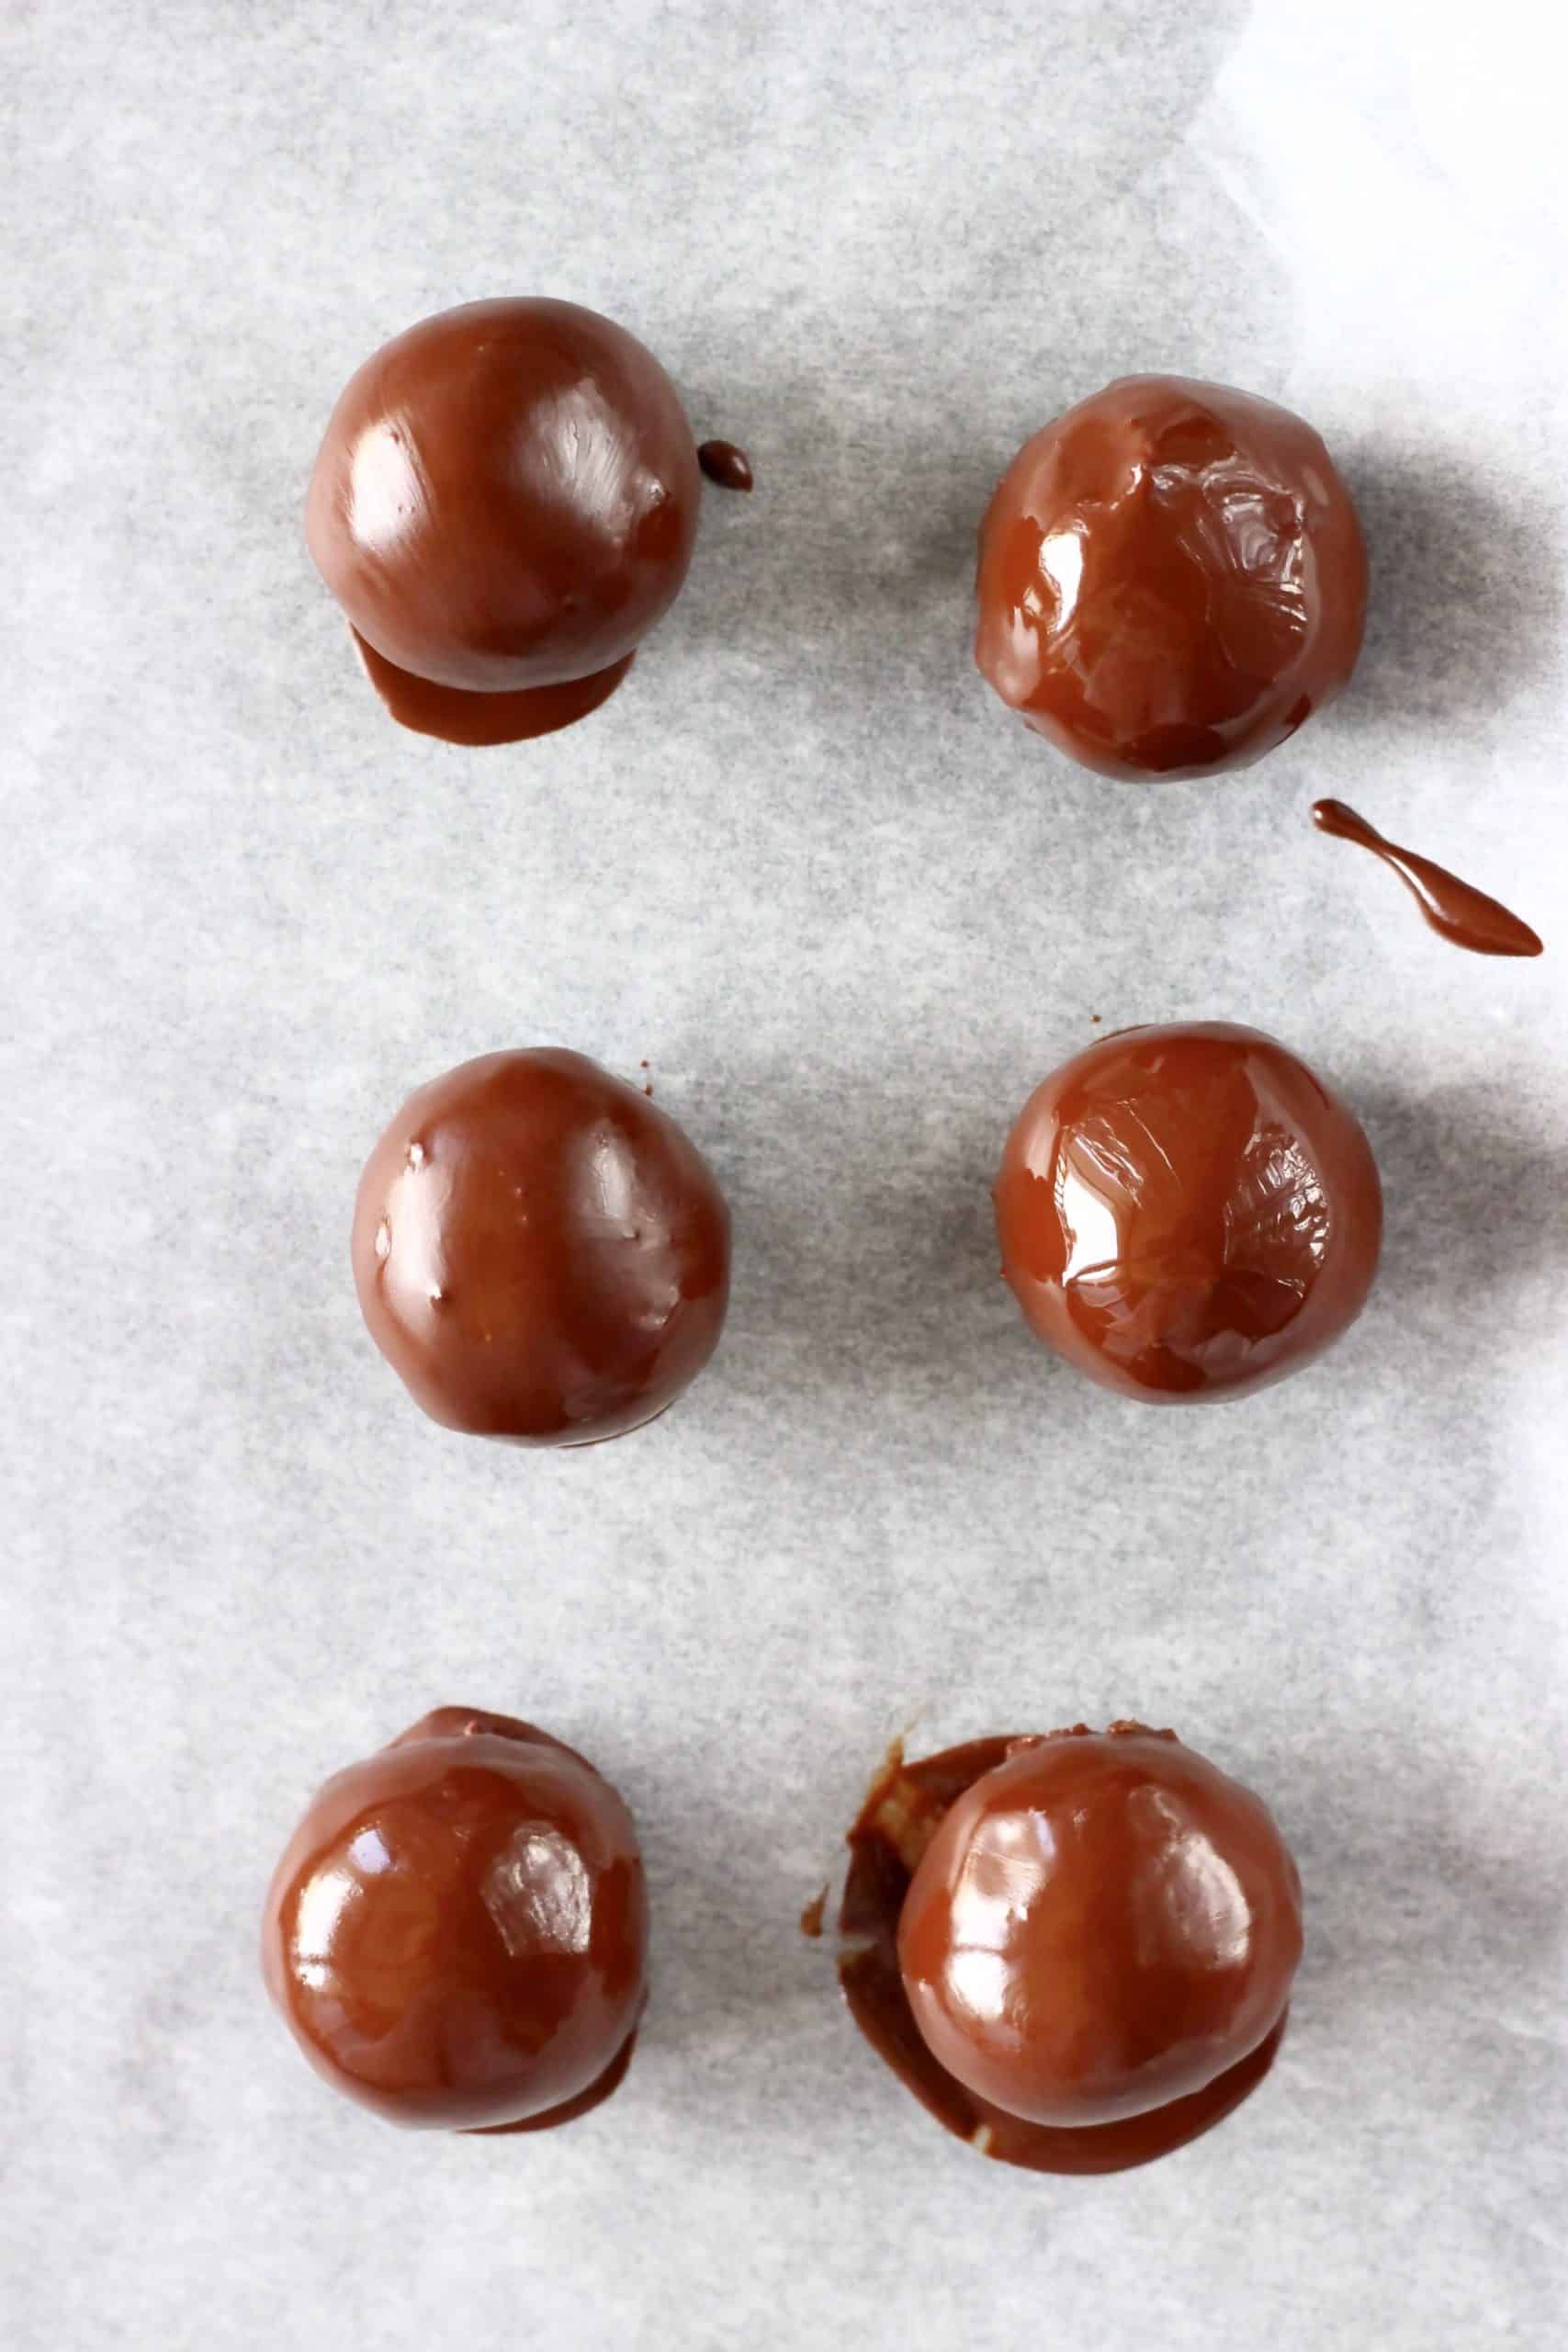 Six healthy peanut butter balls dipped with melted chocolate on a baking tray lined with baking paper